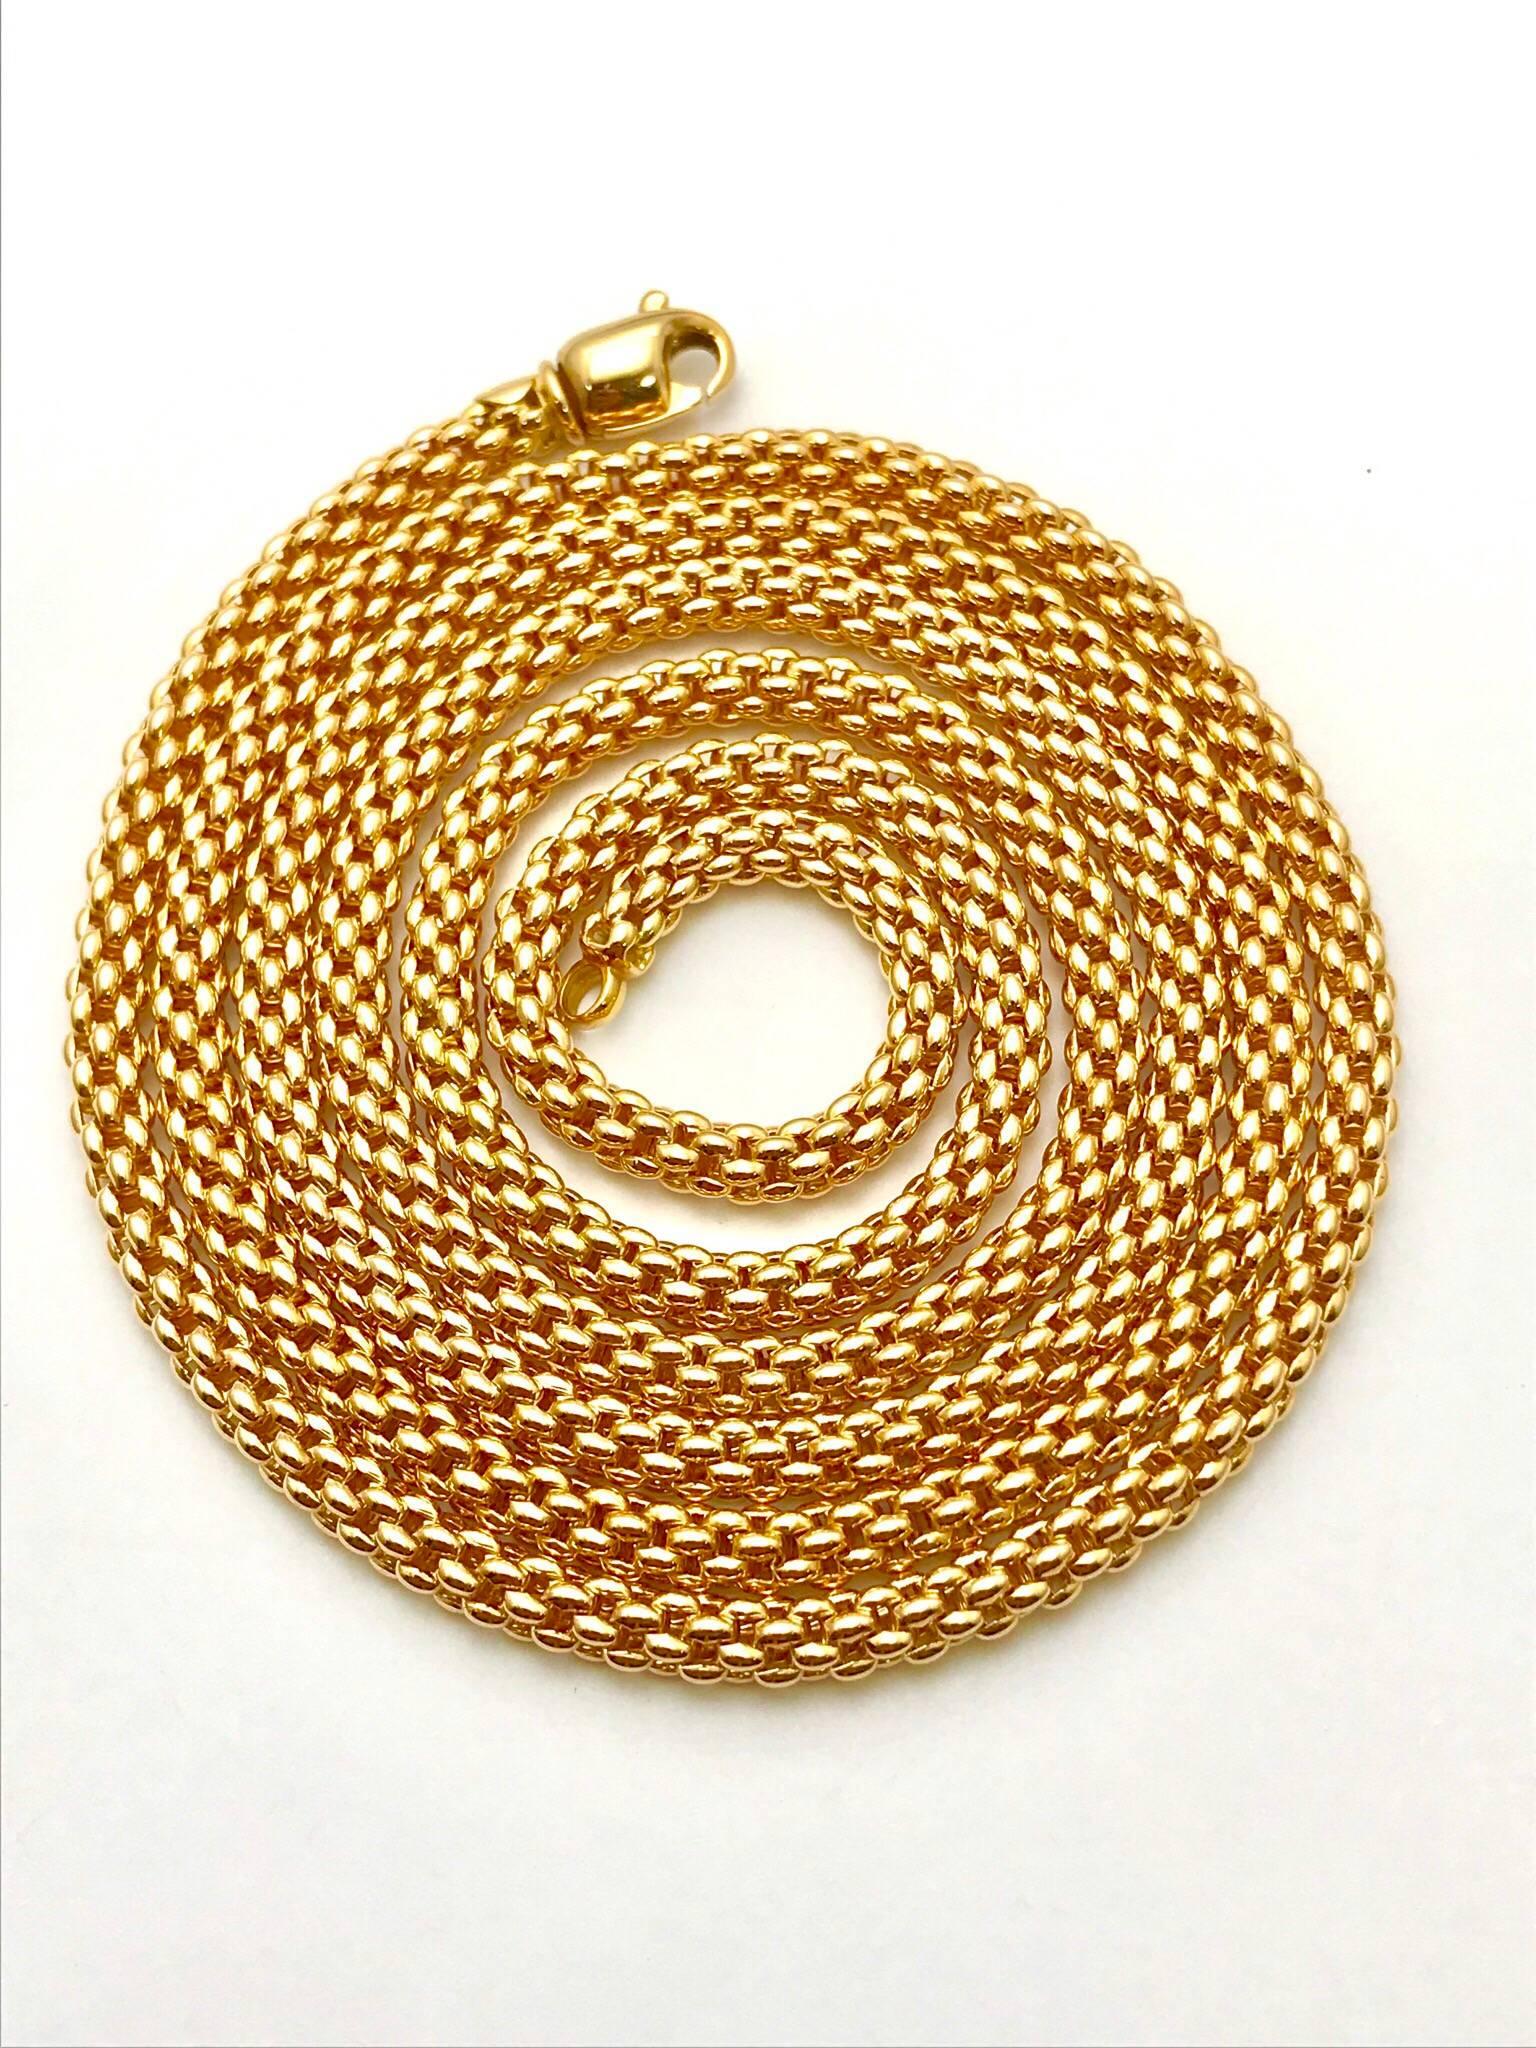 Women's or Men's Fope Vendome Woven Rose Gold Italian Made Necklace